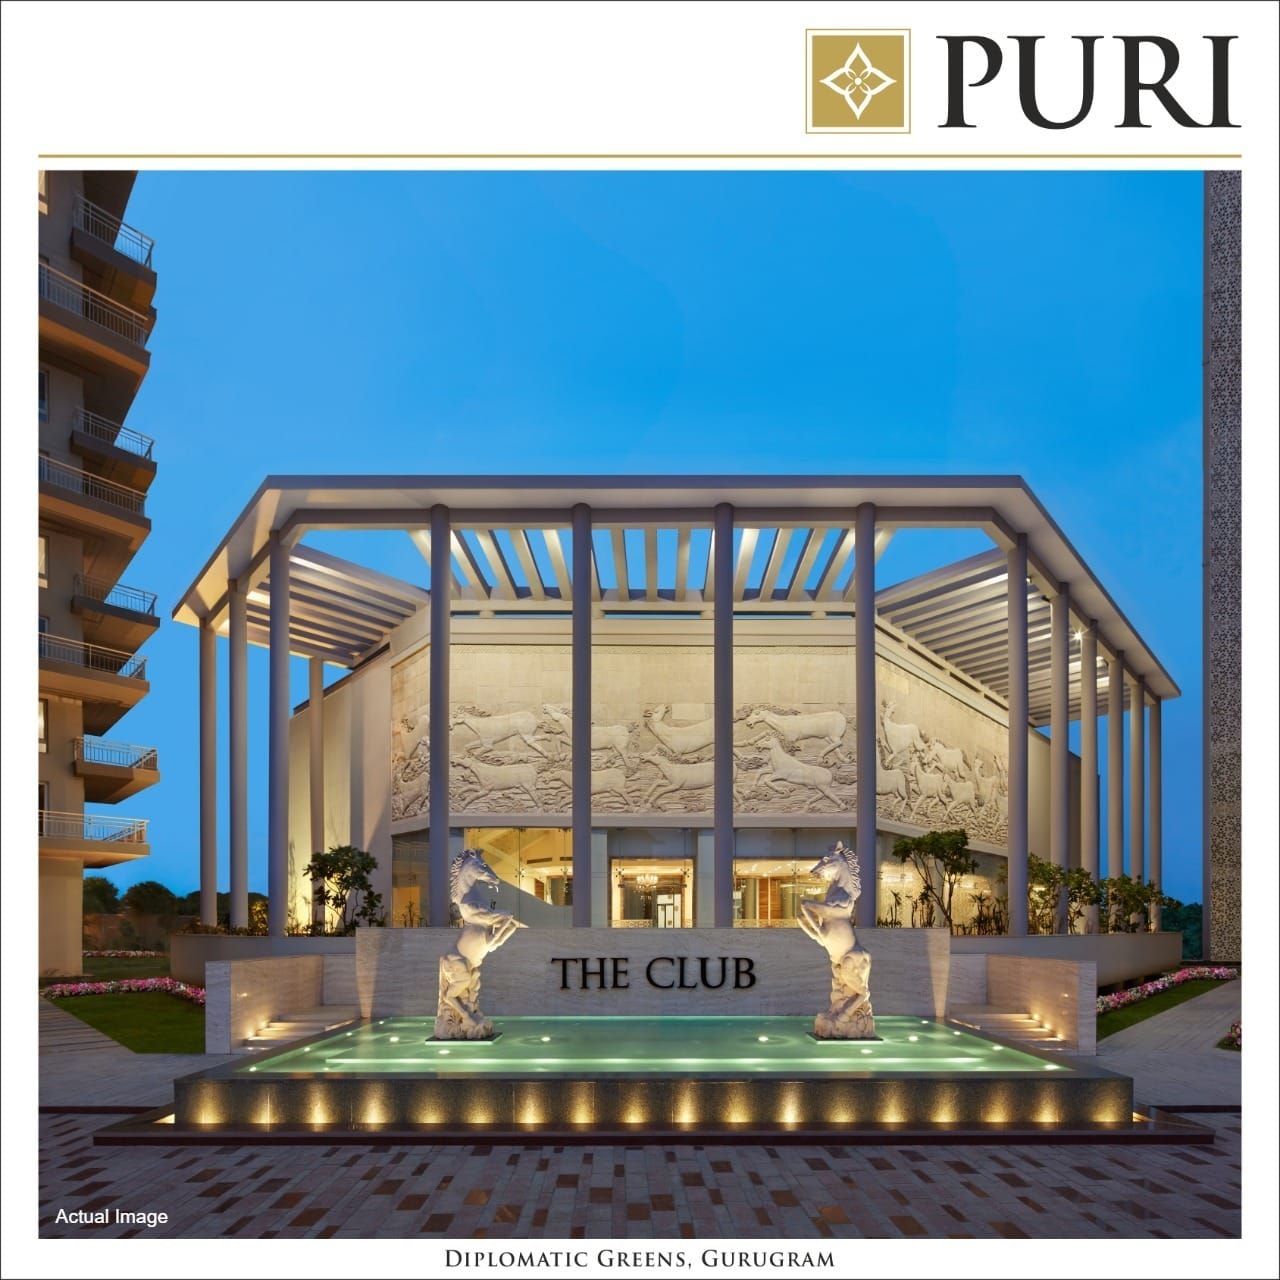 Experience the pinnacle of luxury as you explore an immaculate club house at Puri Diplomatic Greens, Gurgaon